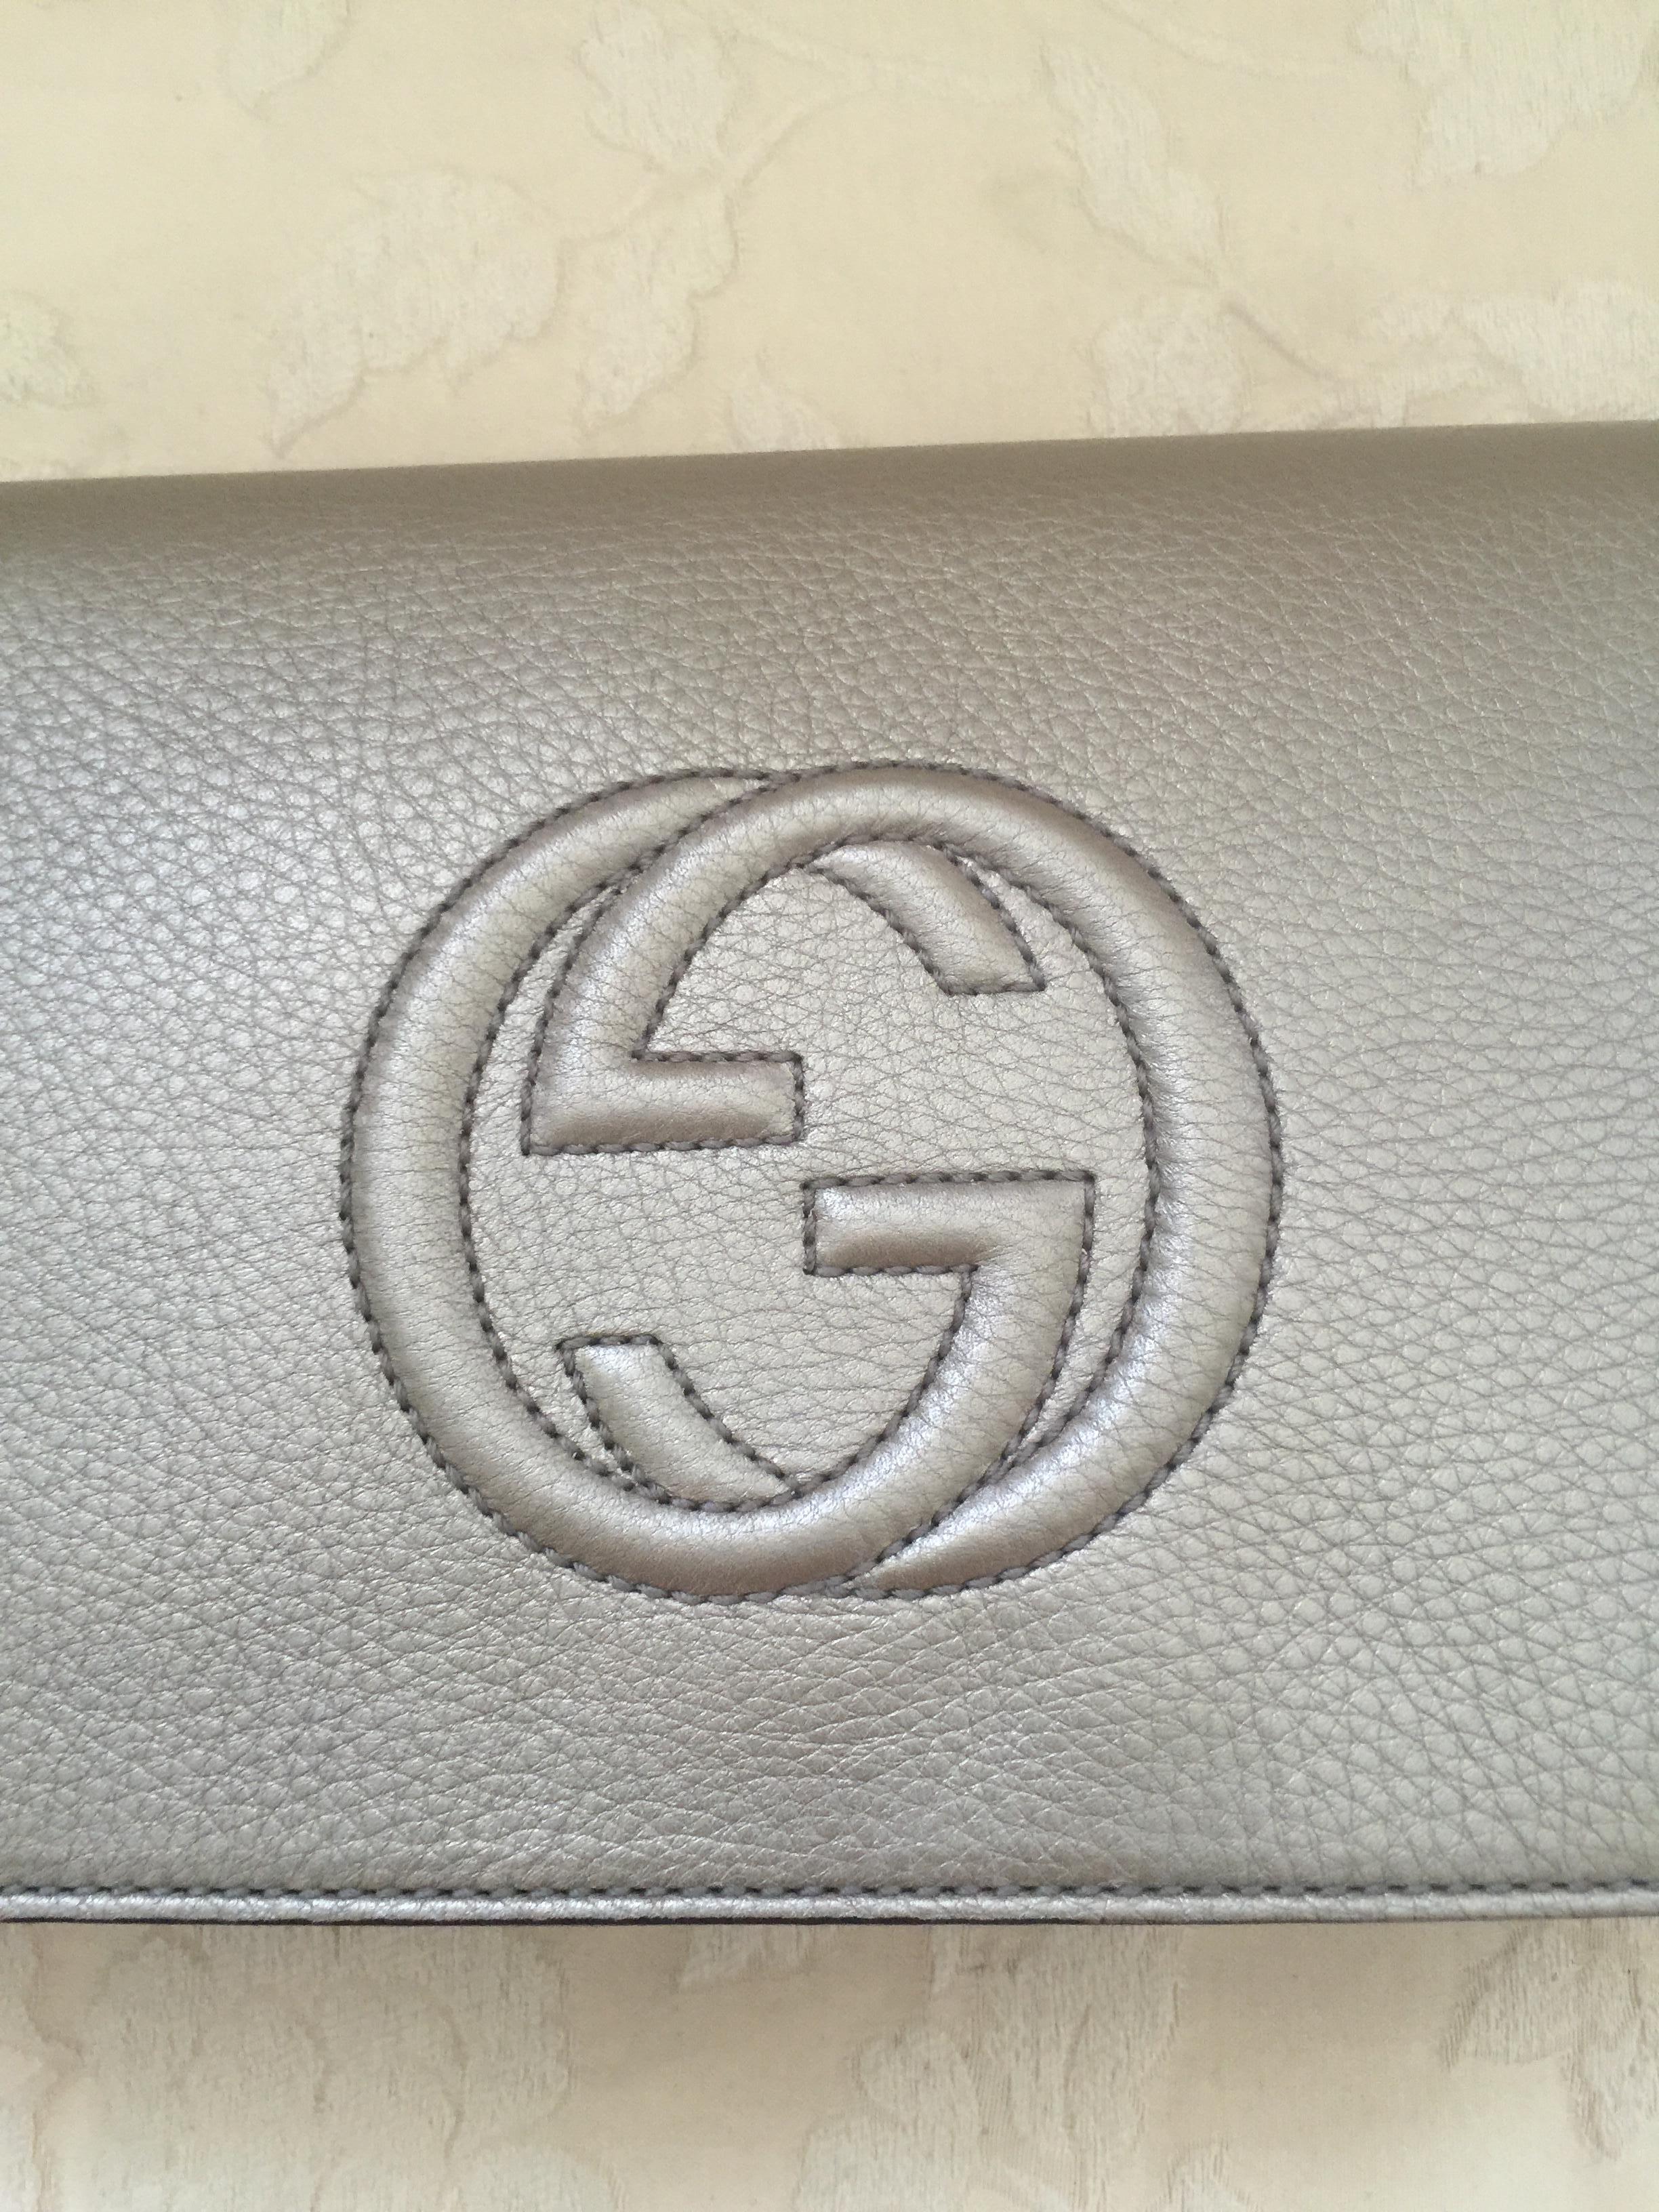 Perfect times clutch, metallic comes with original box and dustbag.
Timeless elegance , the double G is a sign of quality and fine craftsmenship.
Pebbled leather.
Snap closure
111/2